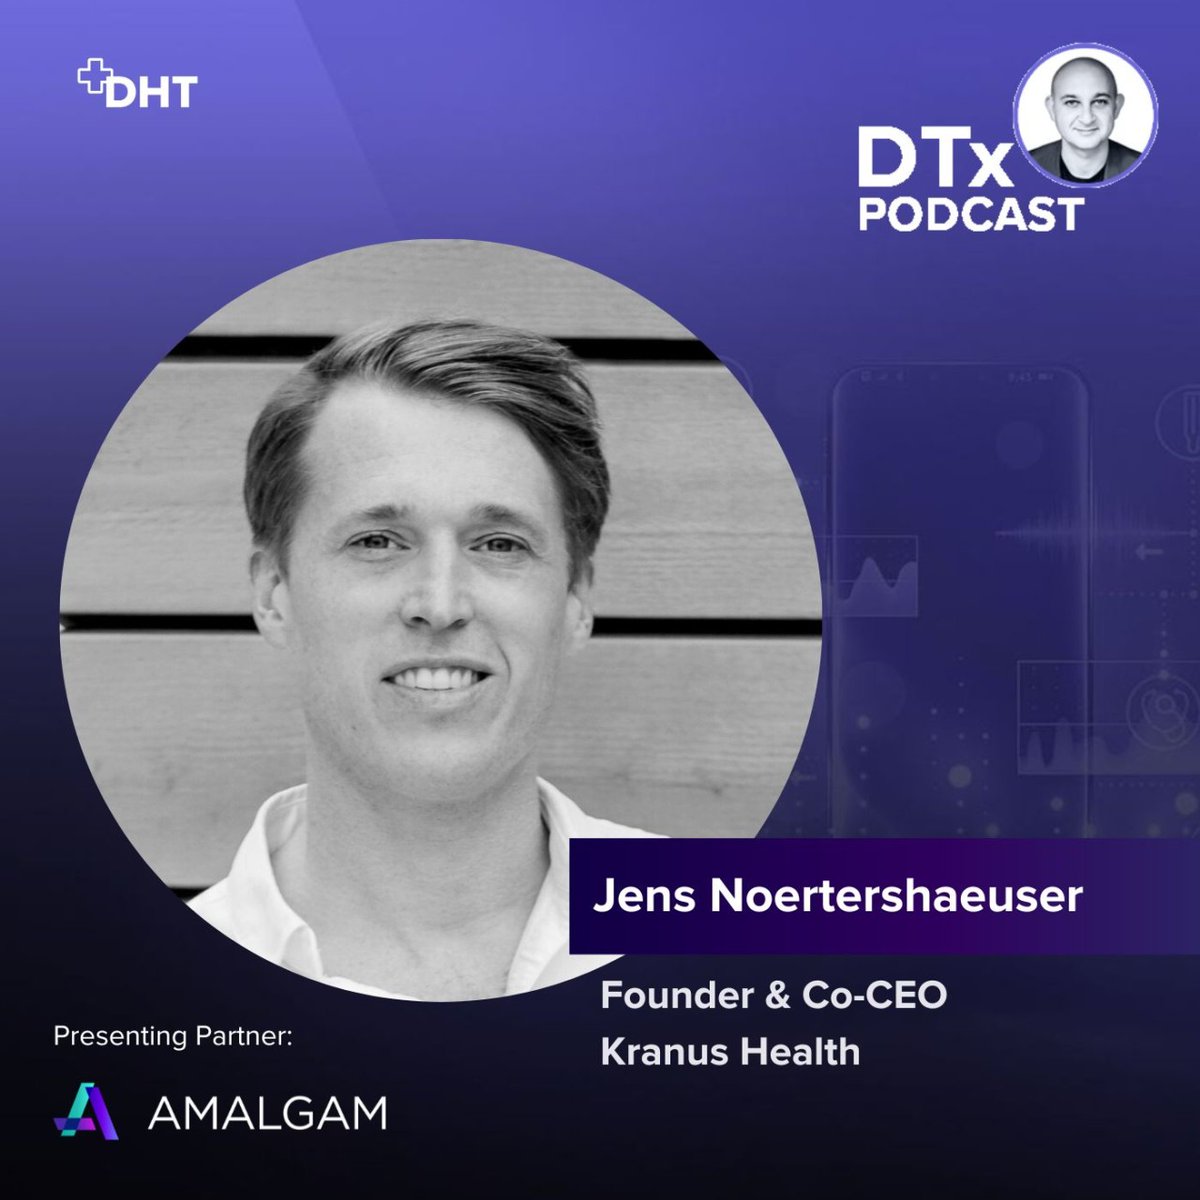 Kranus Health has achieved another milestone: successful price negotiations with the GKV-Spitzenverband! To provide some context, we're revisiting this #DTxPodcast episode with Jens Noertershaeuser, Founder & Co-CEO of @KranusHealth Listen: listen.podcasts.health/S3-WJxg3